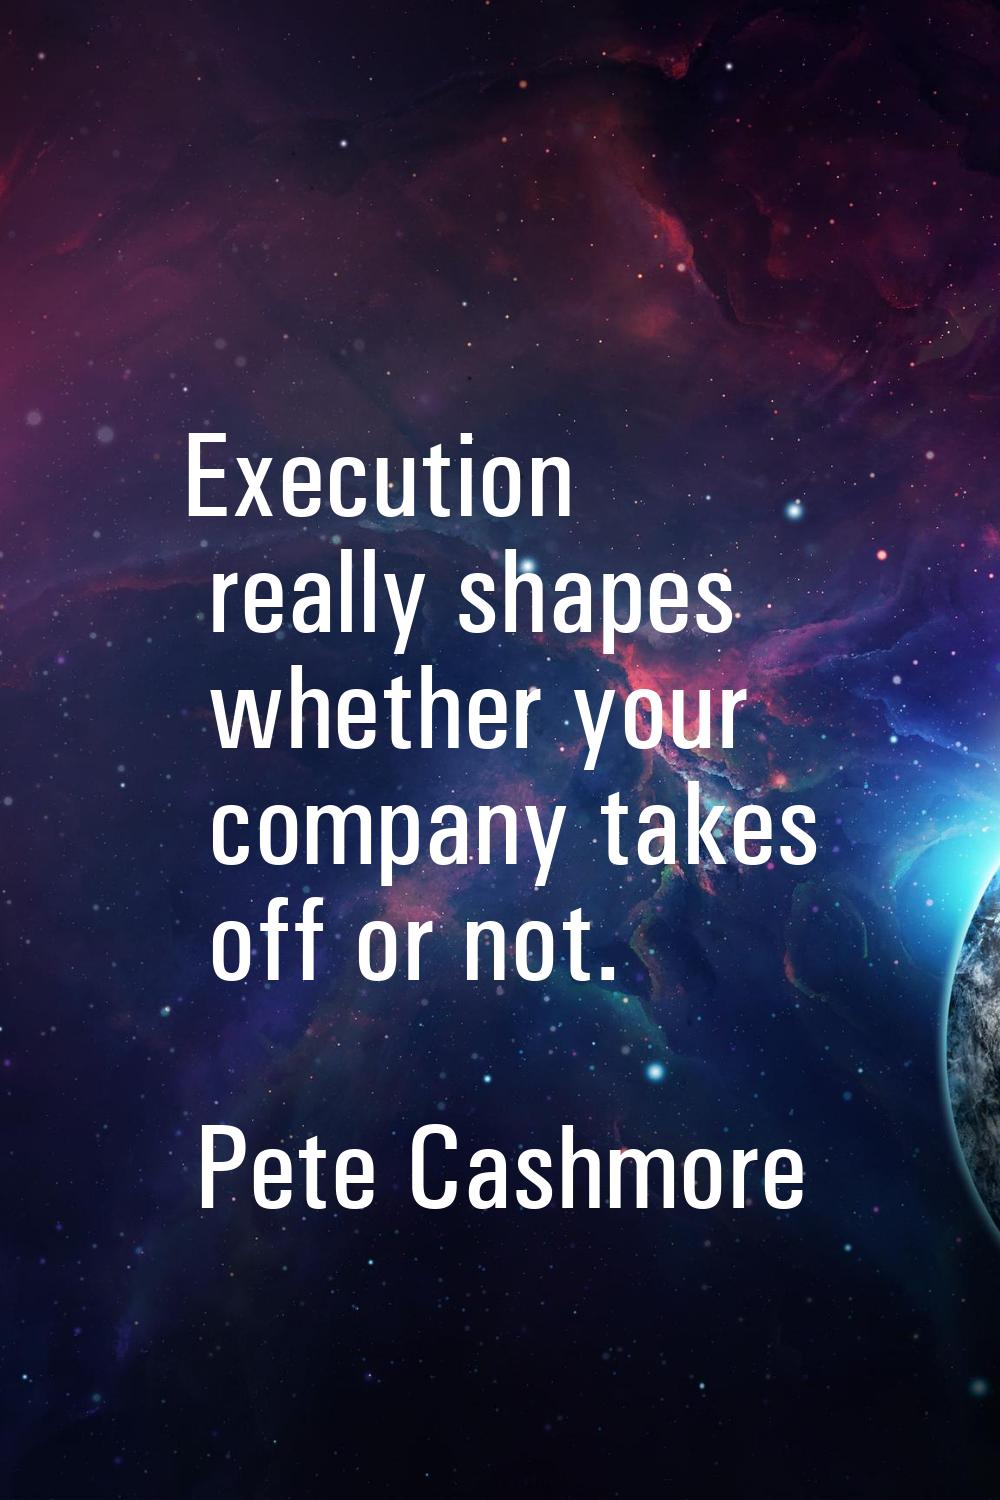 Execution really shapes whether your company takes off or not.